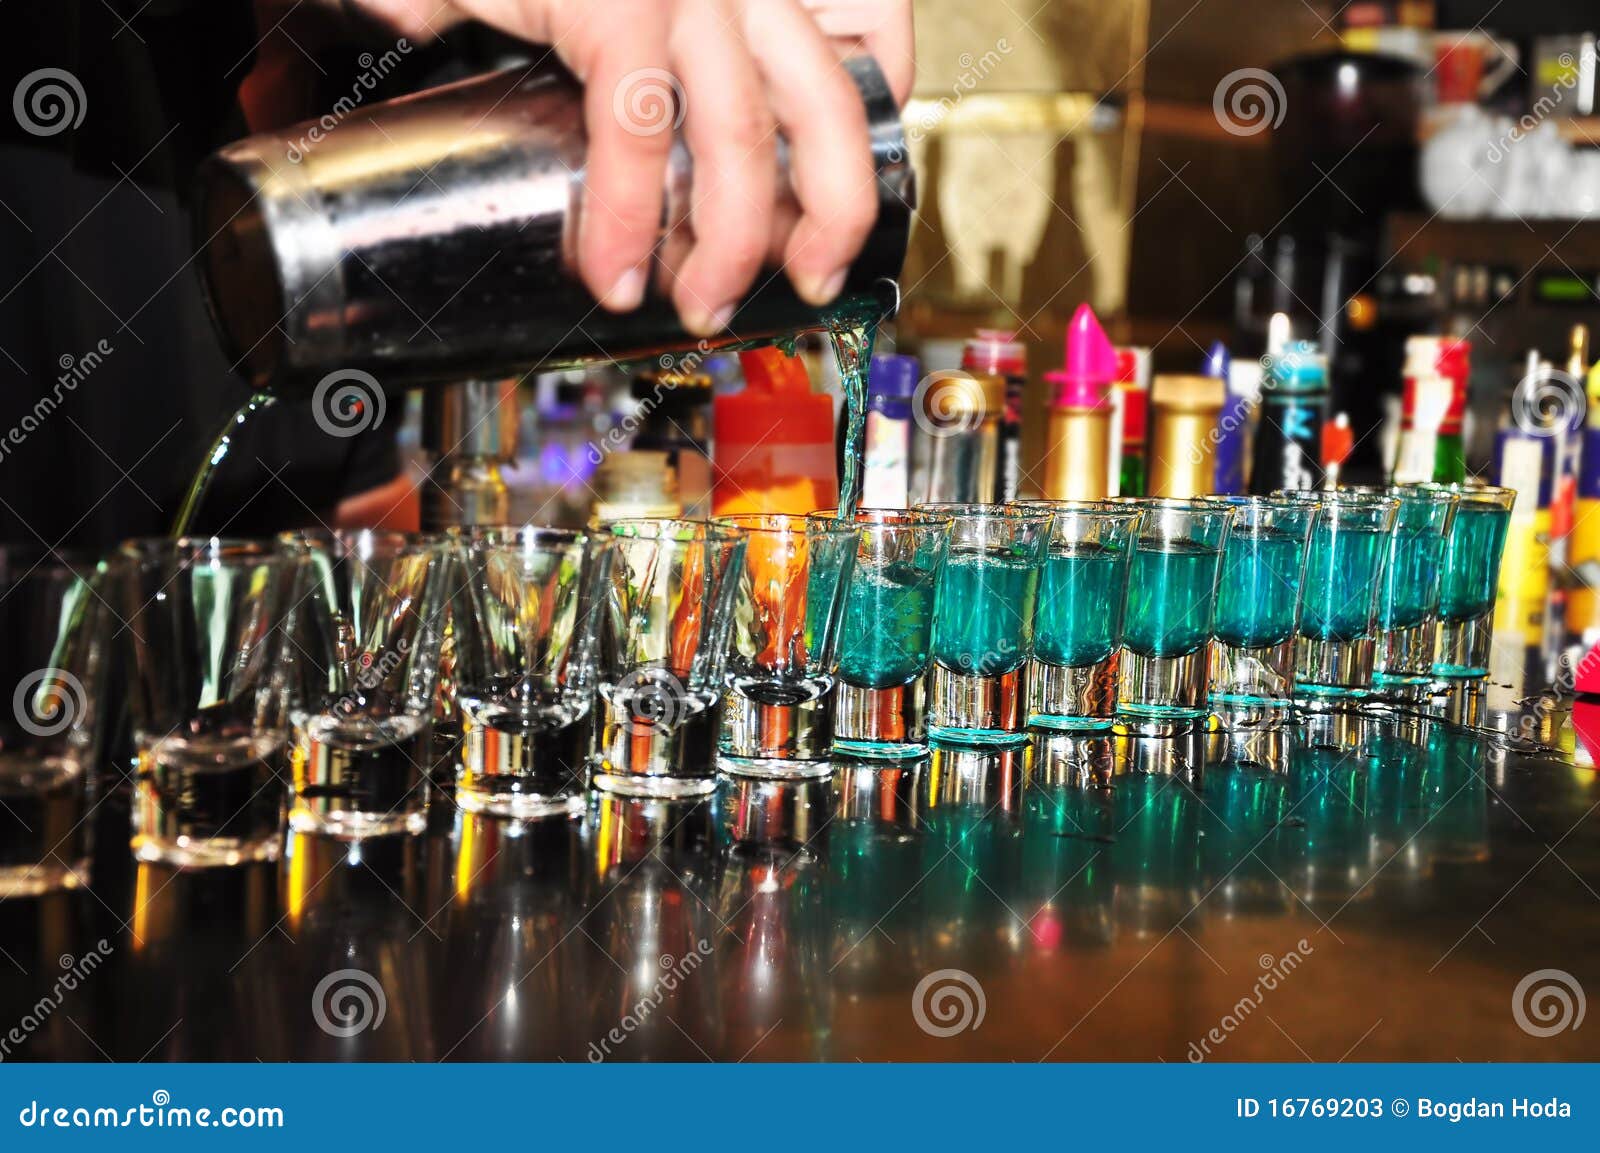 bartender pouring alcoholic drink